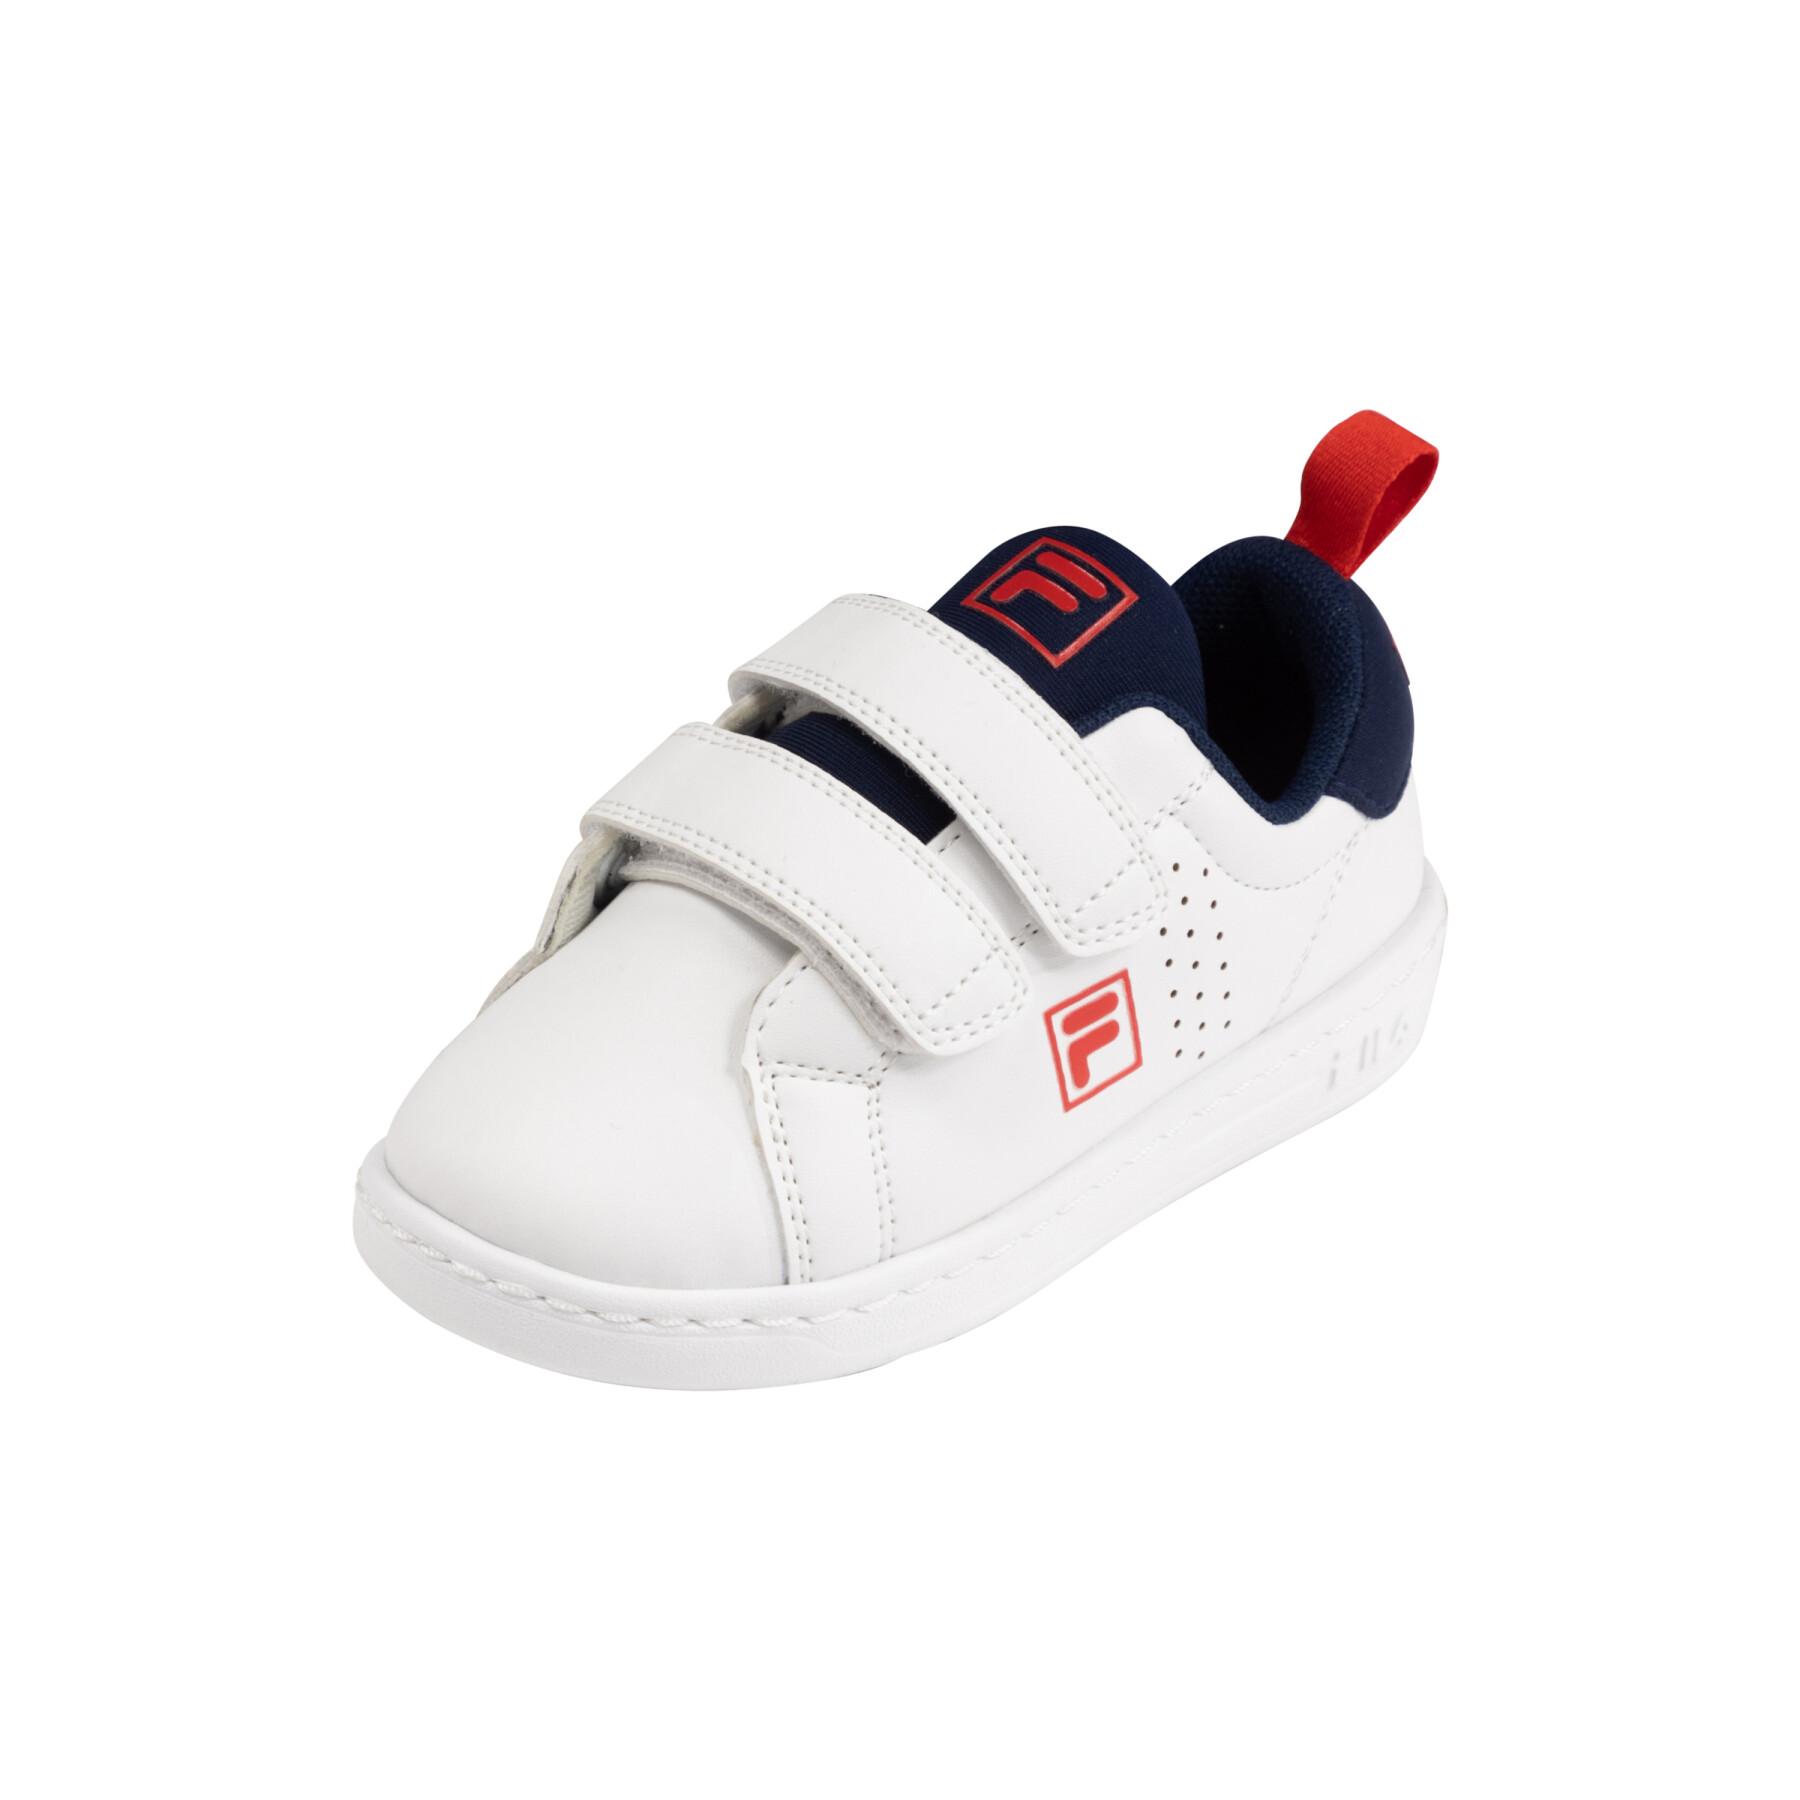 Velcro baby sneakers Fila Crosscourt - Baby Baby Sneakers NT - Shoes Baby - A 2